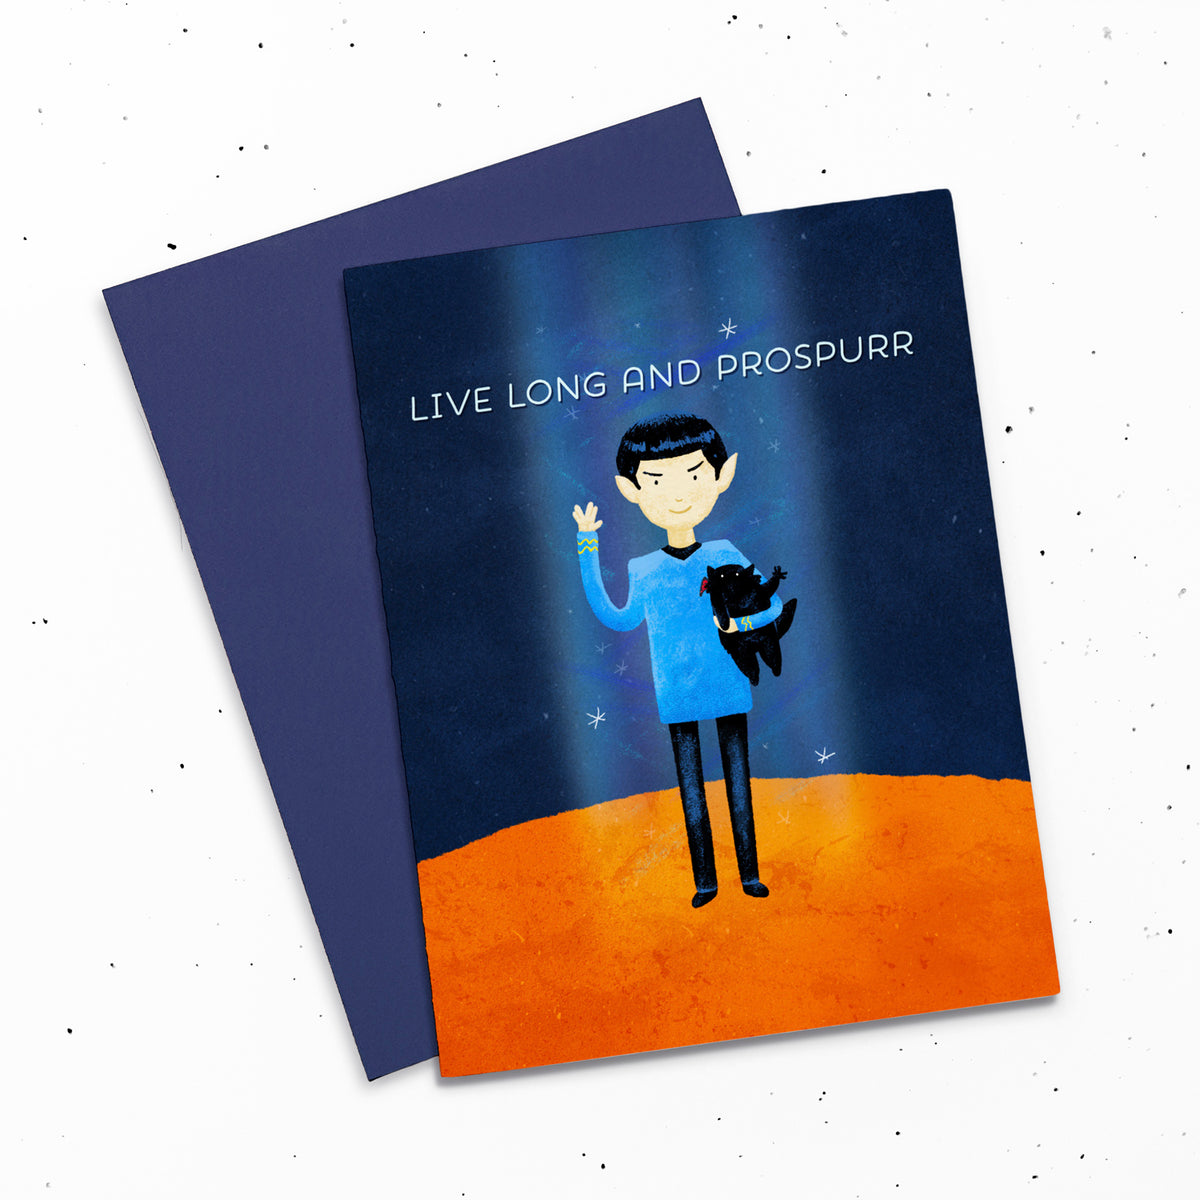 Live Long And Prospurr - Card with a digital painting of Spock holding a black cat. Both are making the Vulcan salute. LLAP.